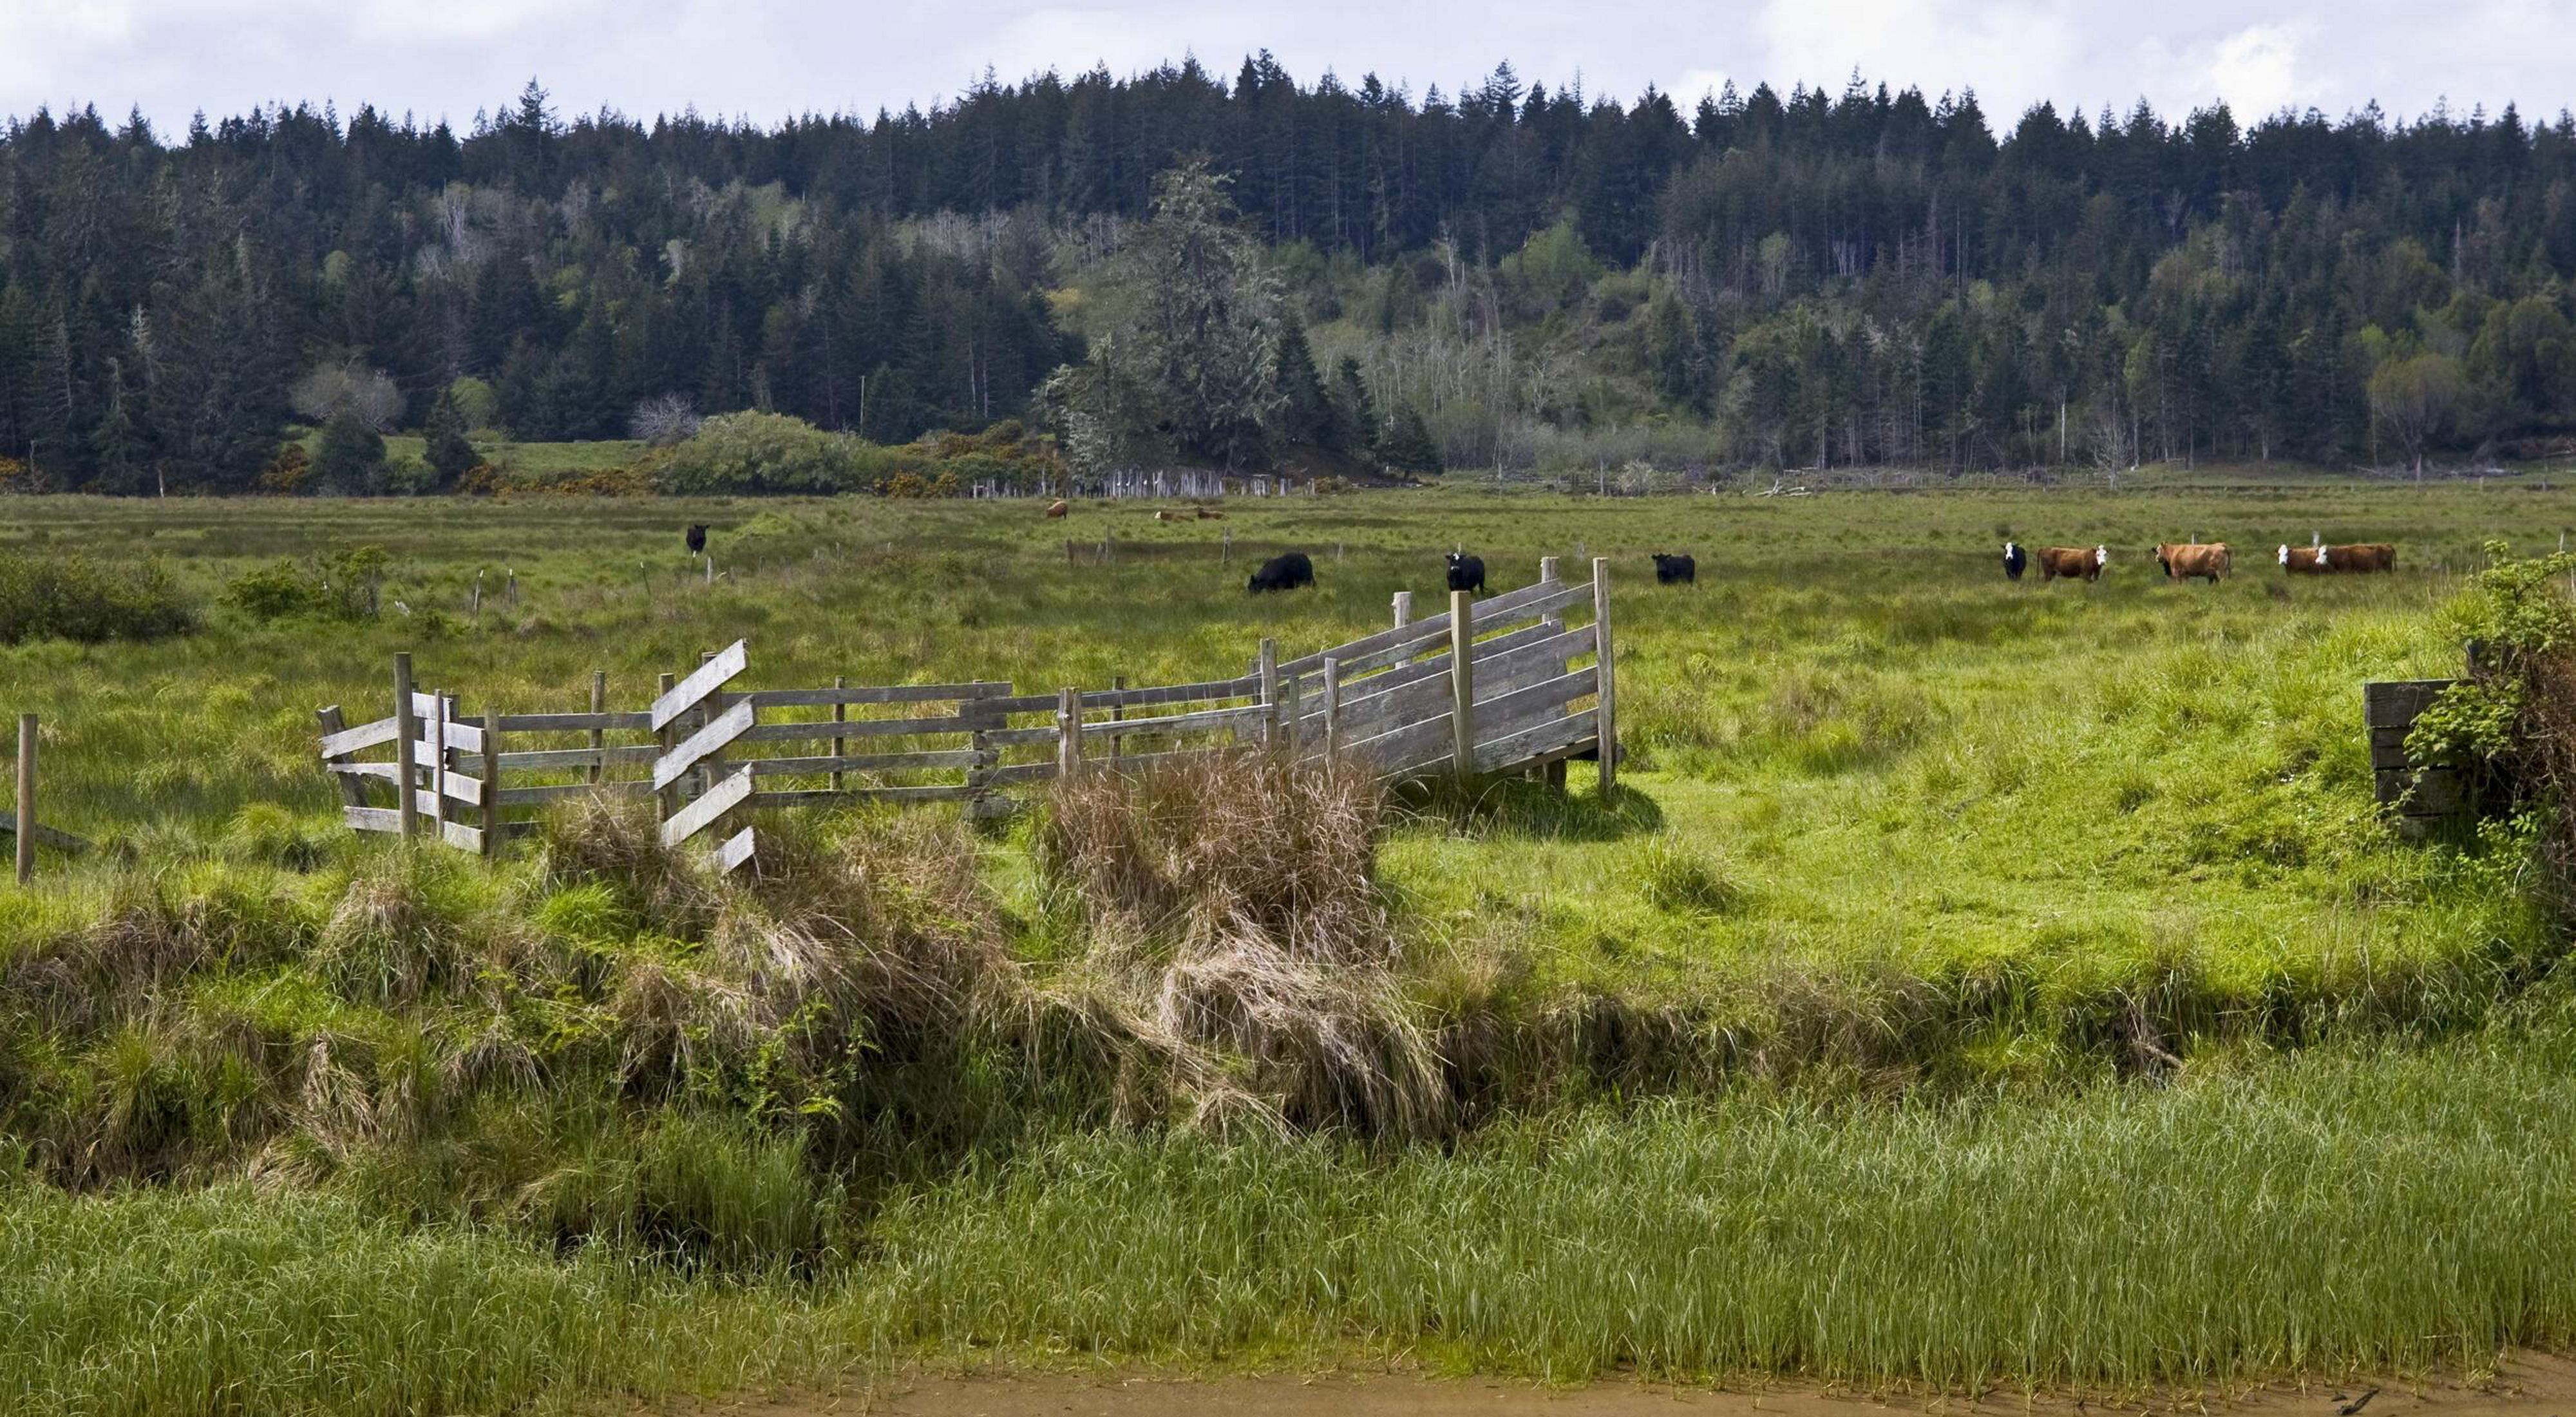 Cattle grazing in a field with forest in the background.